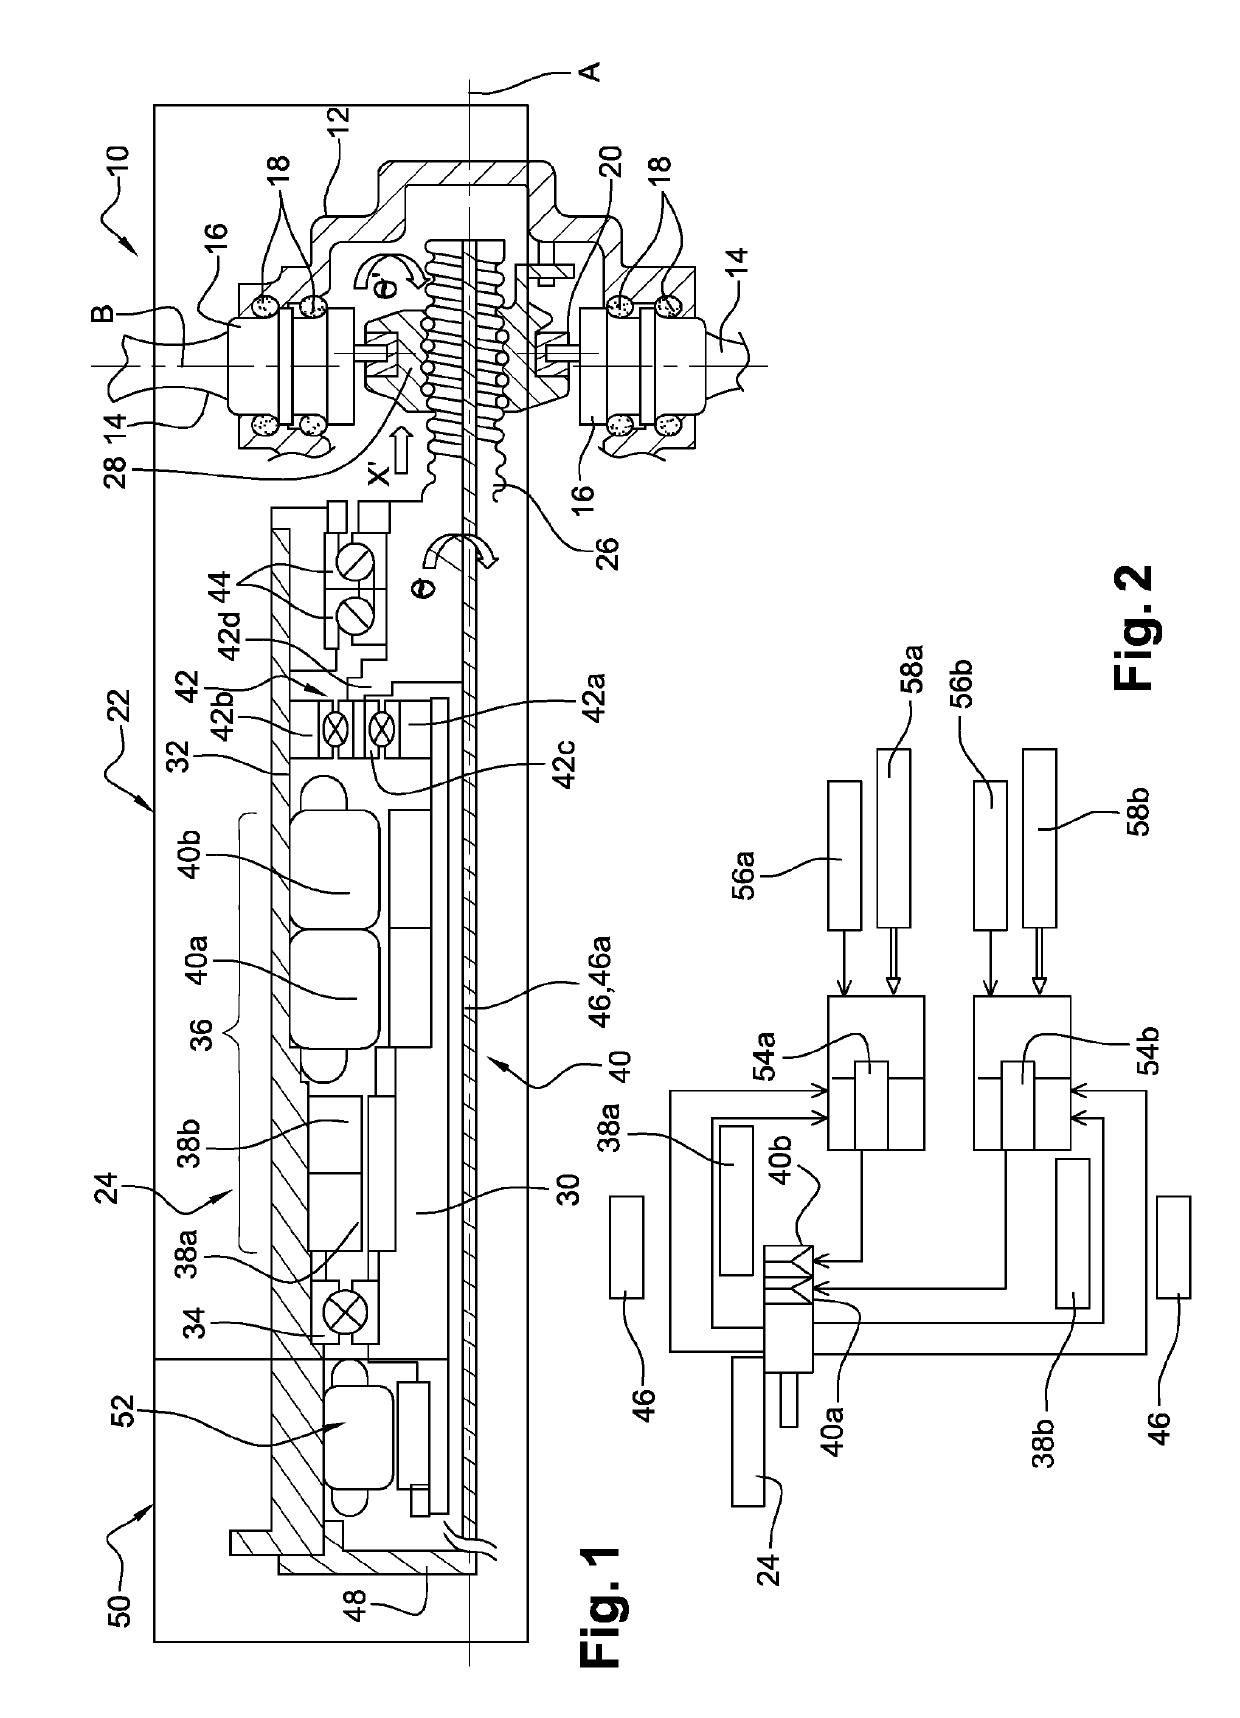 Pitch actuation system for a turbomachine propeller